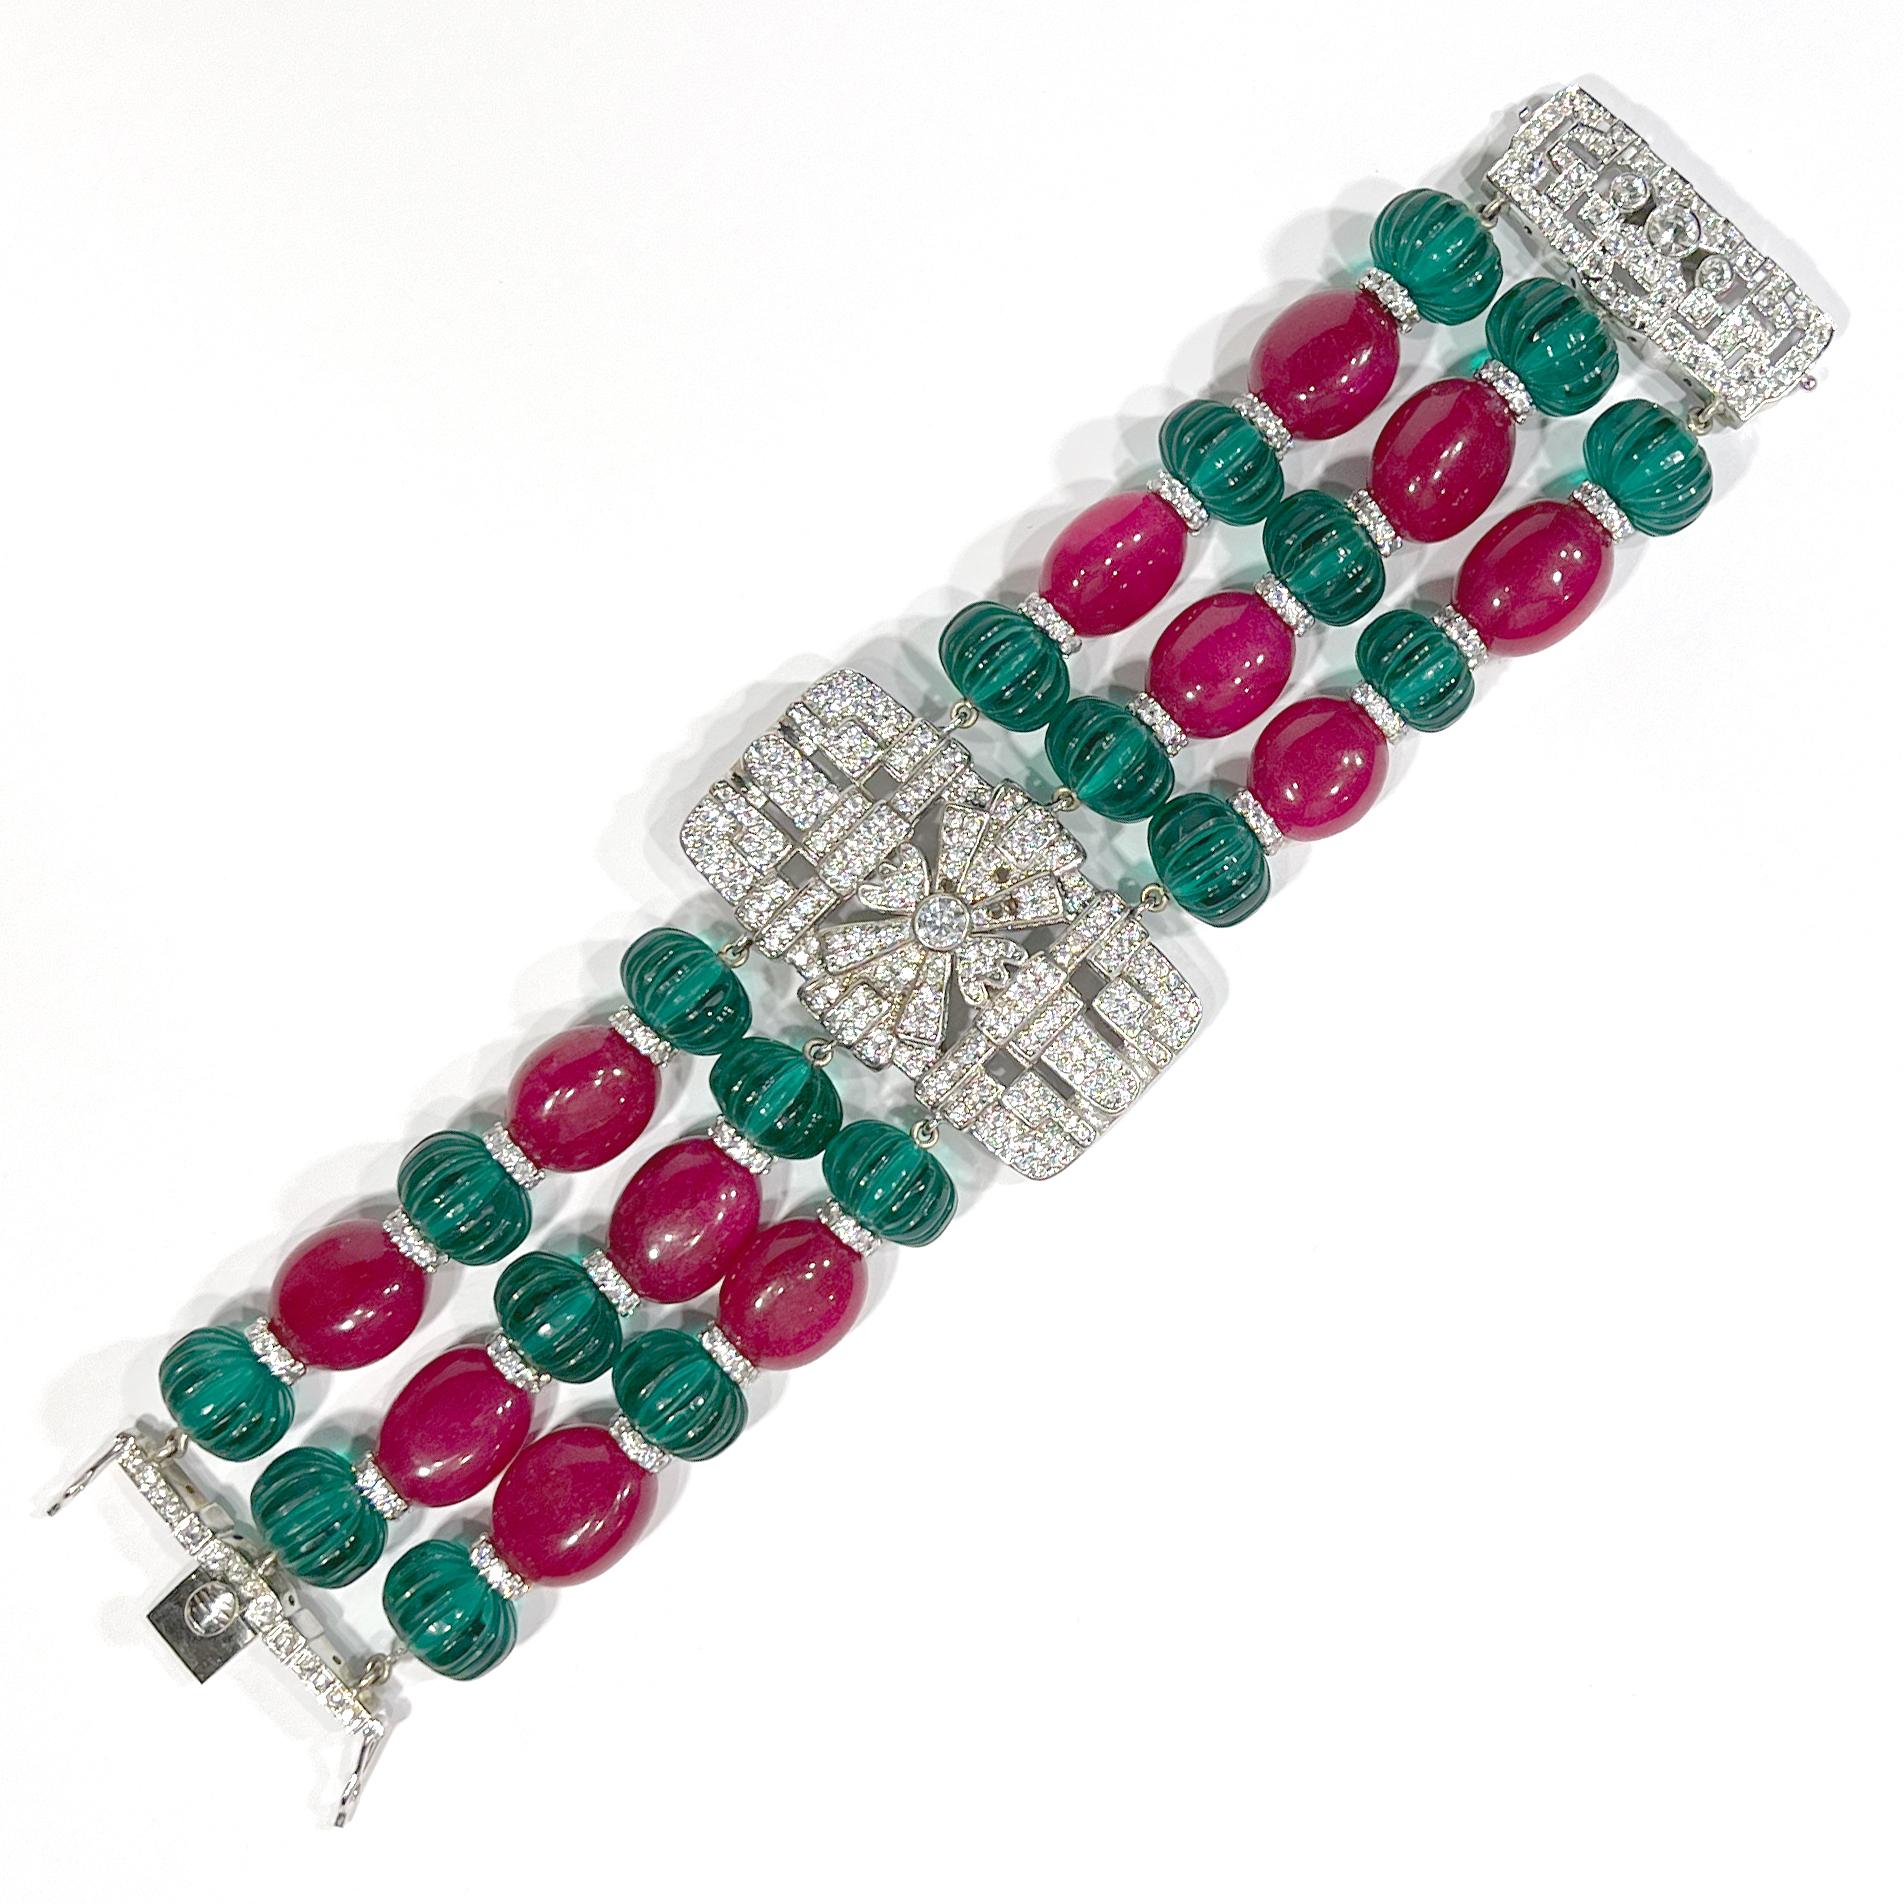 
Art Deco Cartier Style emerald carved beads, cabochon rubies, diamond costume jewelry bracelet mounted in rhodiumed sterling silver. Man made gems of the finest quality. Stunning large pave Art Deco centre for an extra rich effect and a handmade